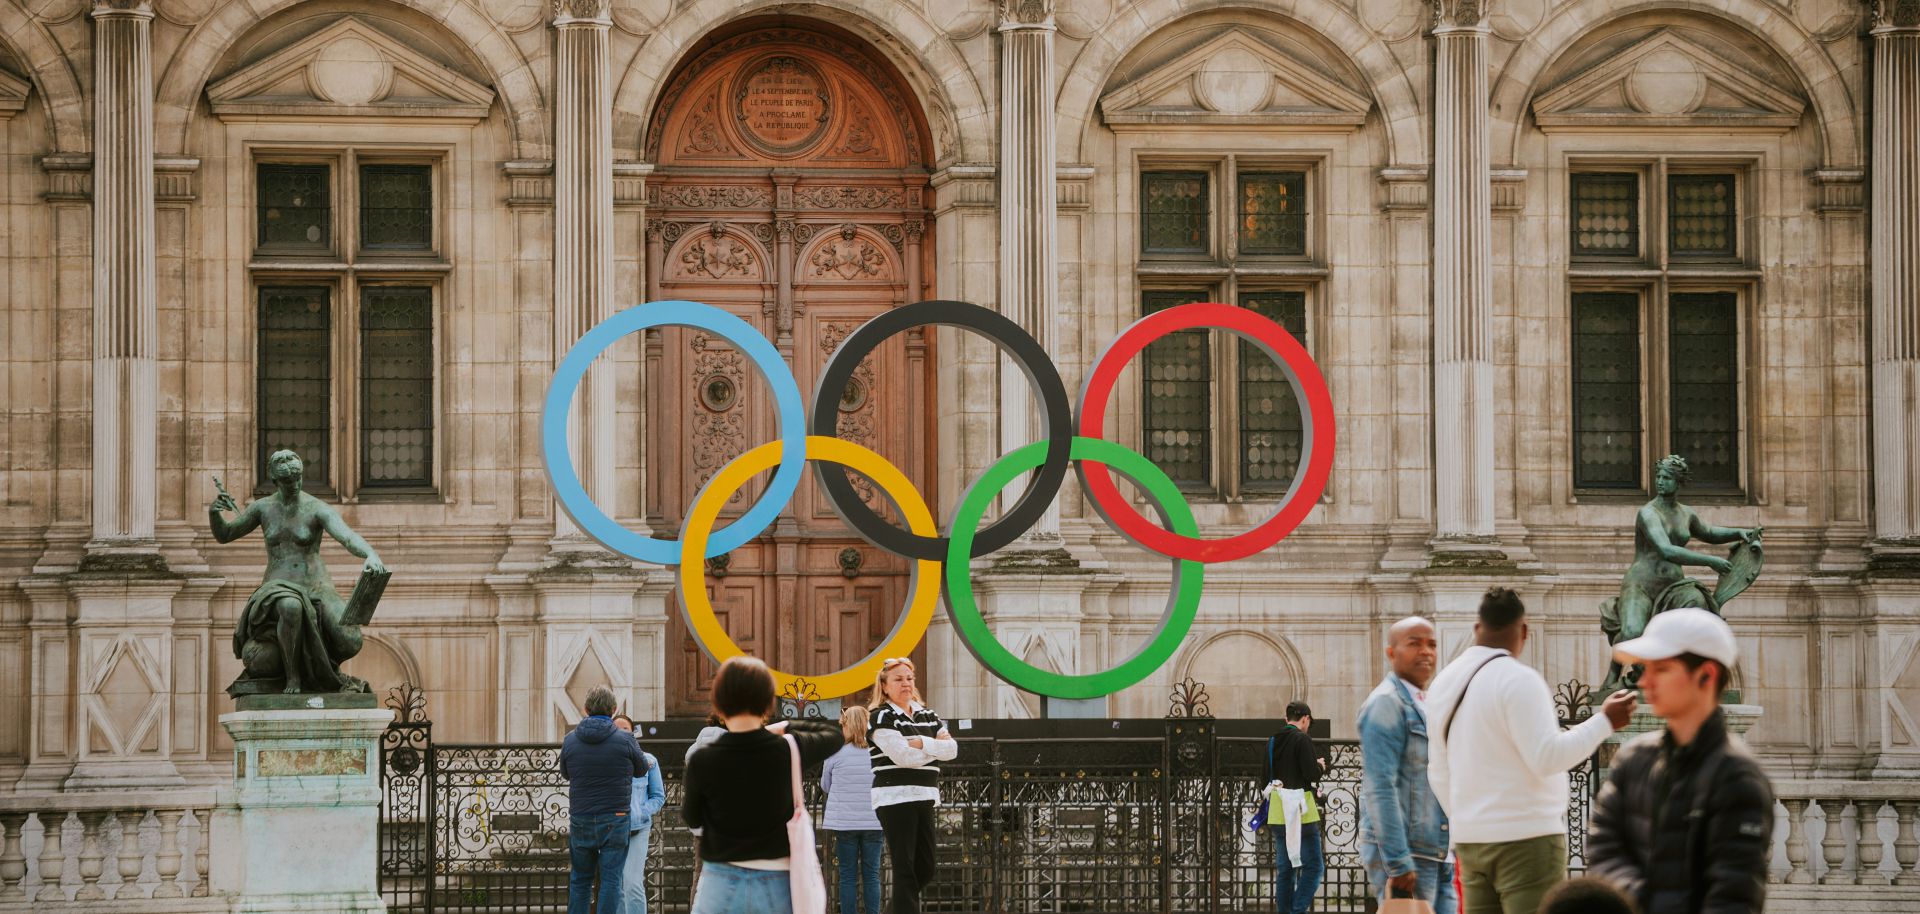 Olympic rings in front of the Hotel de Ville in Paris, France, on May 22, 2023.